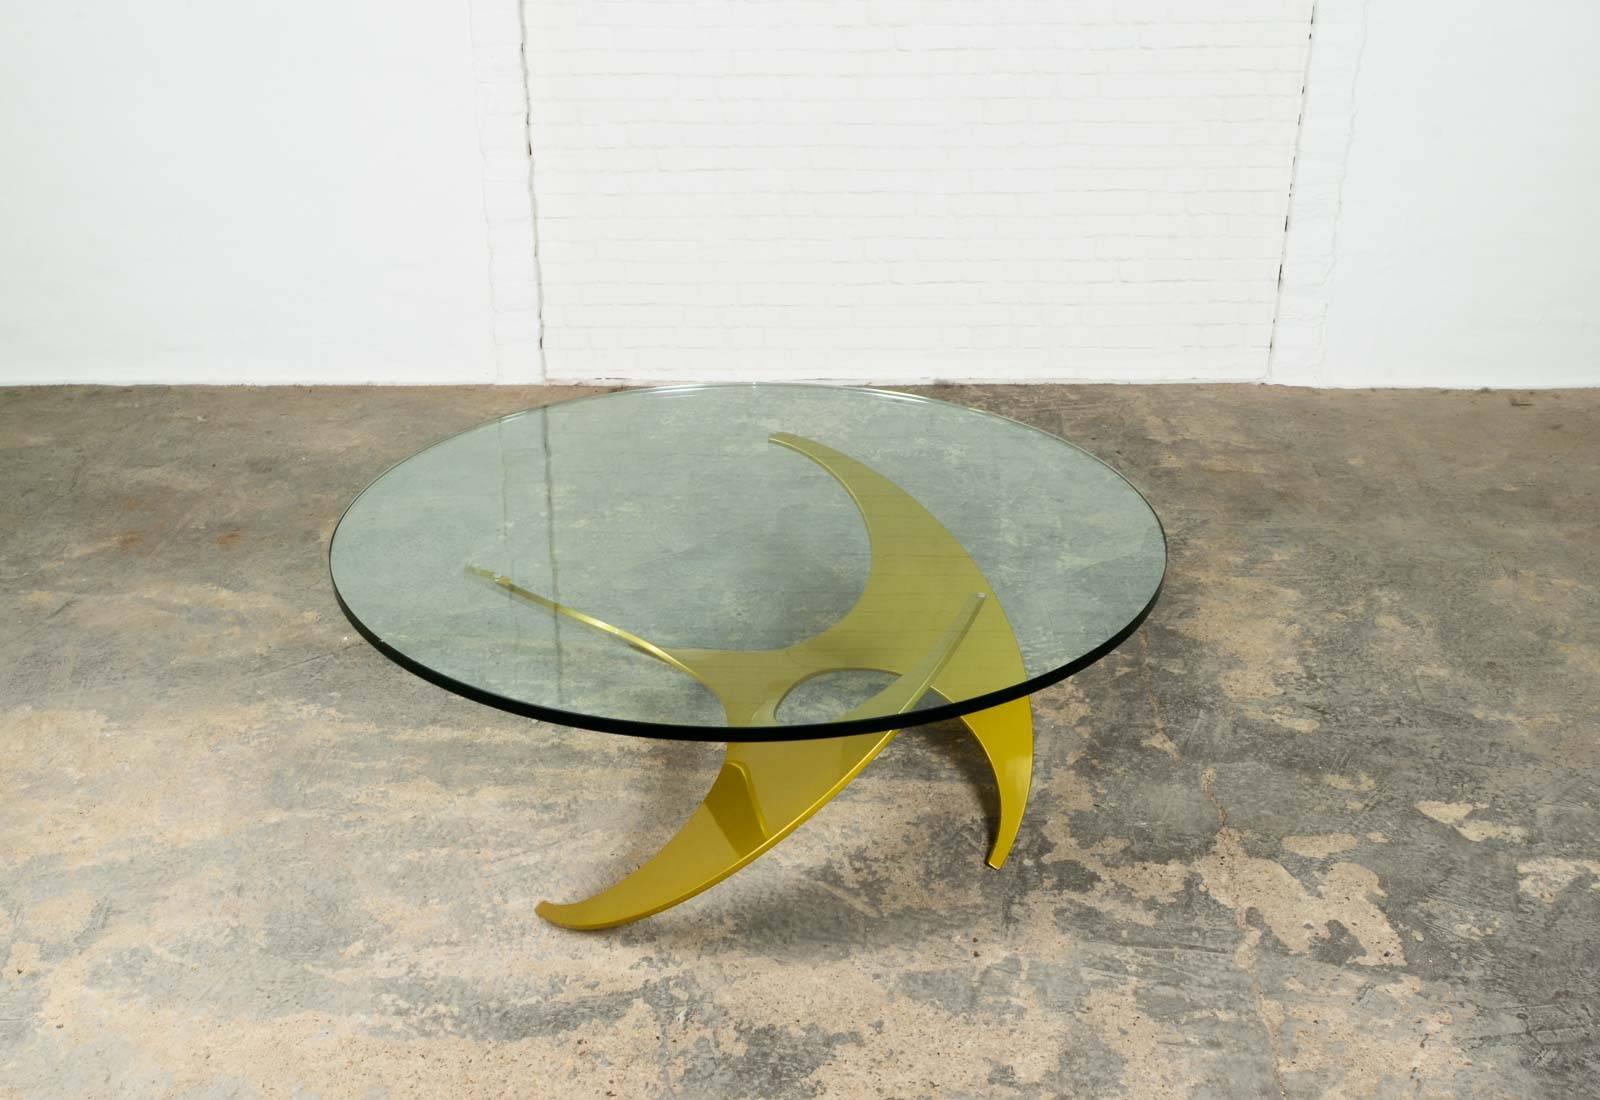 Mid-Century 'Propeller' cocktail table designed by Knut Hesterberg for Ronald Schmitt in 1964, Germany. The table has a gold lacquered aluminium base and a very solid glass round top. The gold anodized aluminium base is hand sculptured into a